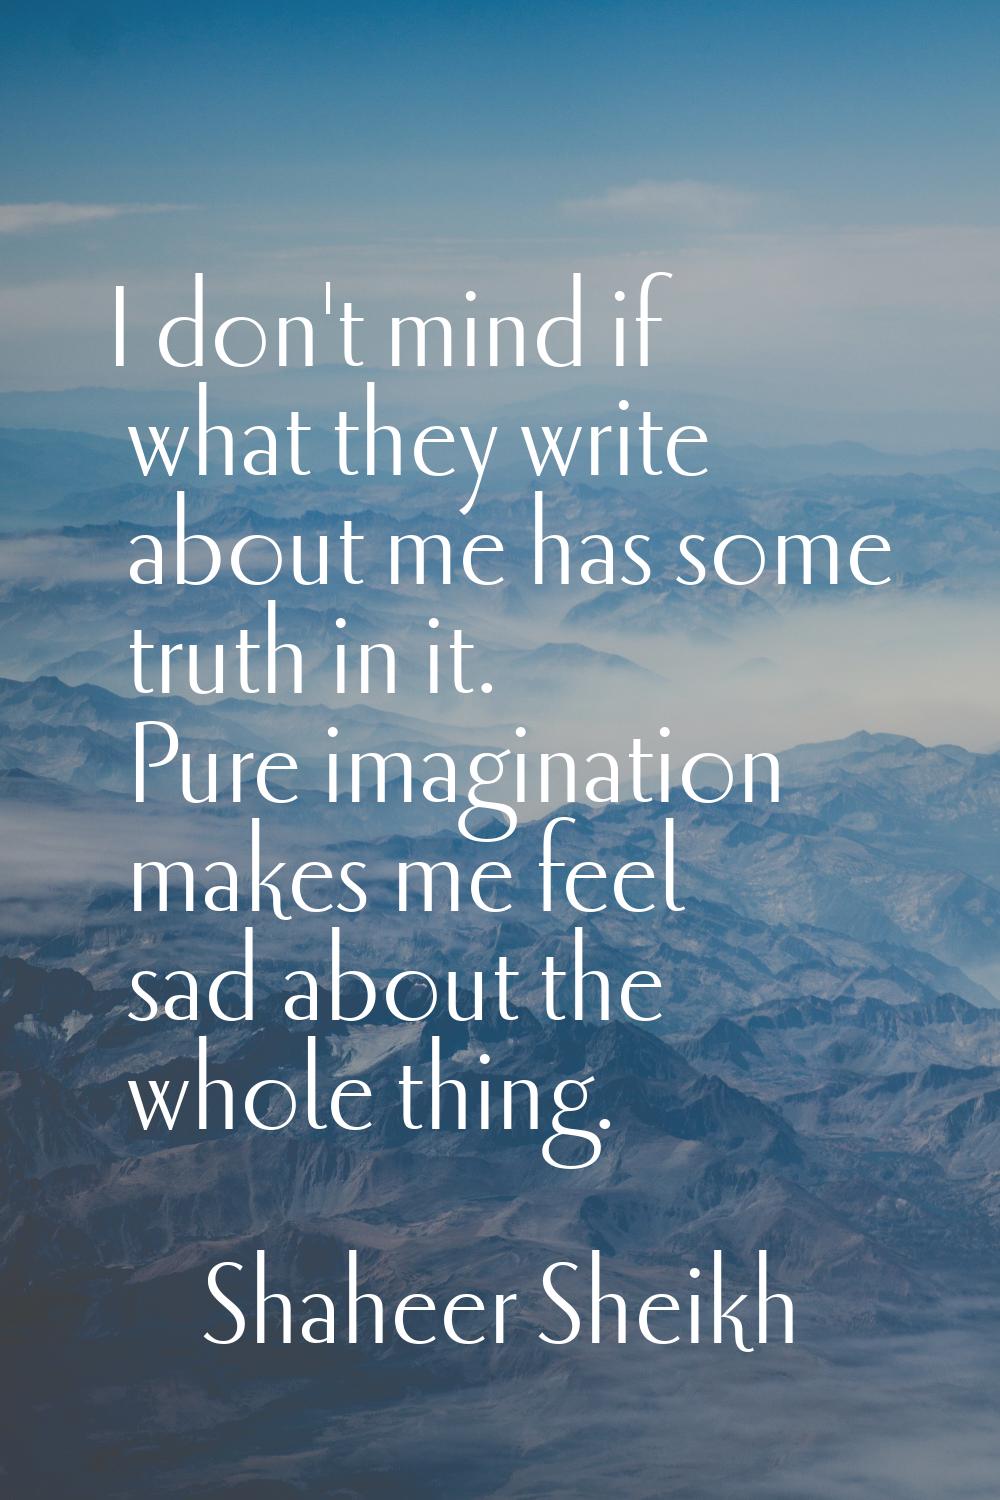 I don't mind if what they write about me has some truth in it. Pure imagination makes me feel sad a